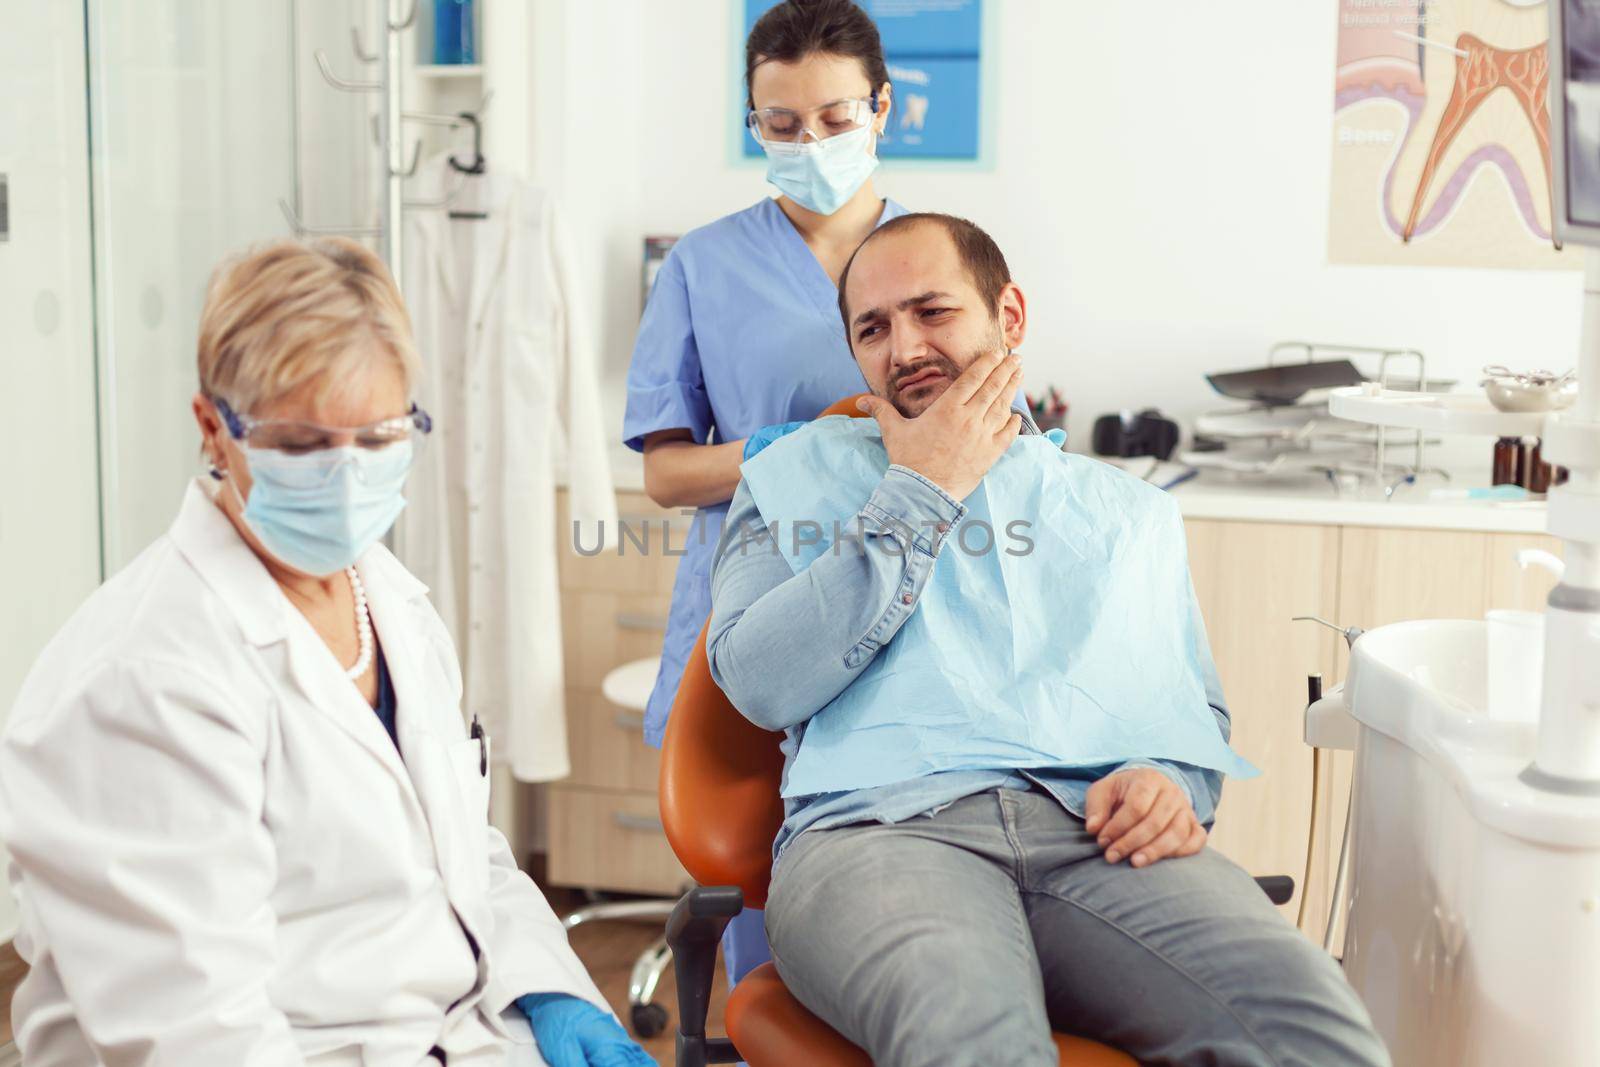 Man patient putting his hand on cheek showing toothache complaining about tooth pain by DCStudio